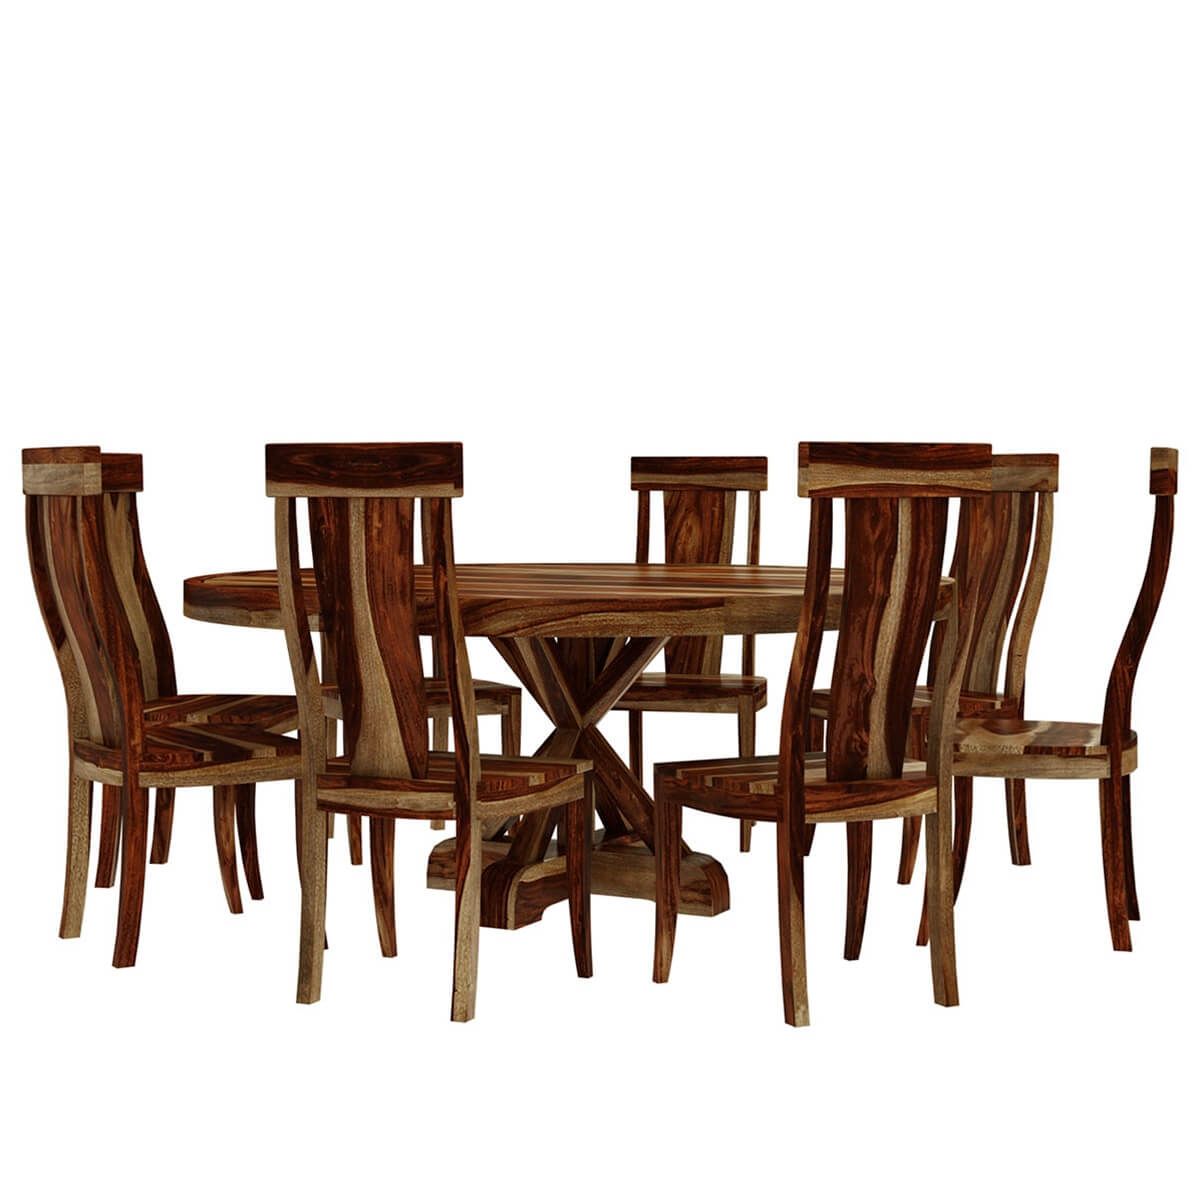 Bedford X Pedestal Rustic 72" Round Dining Table With 8 Chairs Set For Most Recent Bedfo 3 Piece Dining Sets (View 7 of 20)